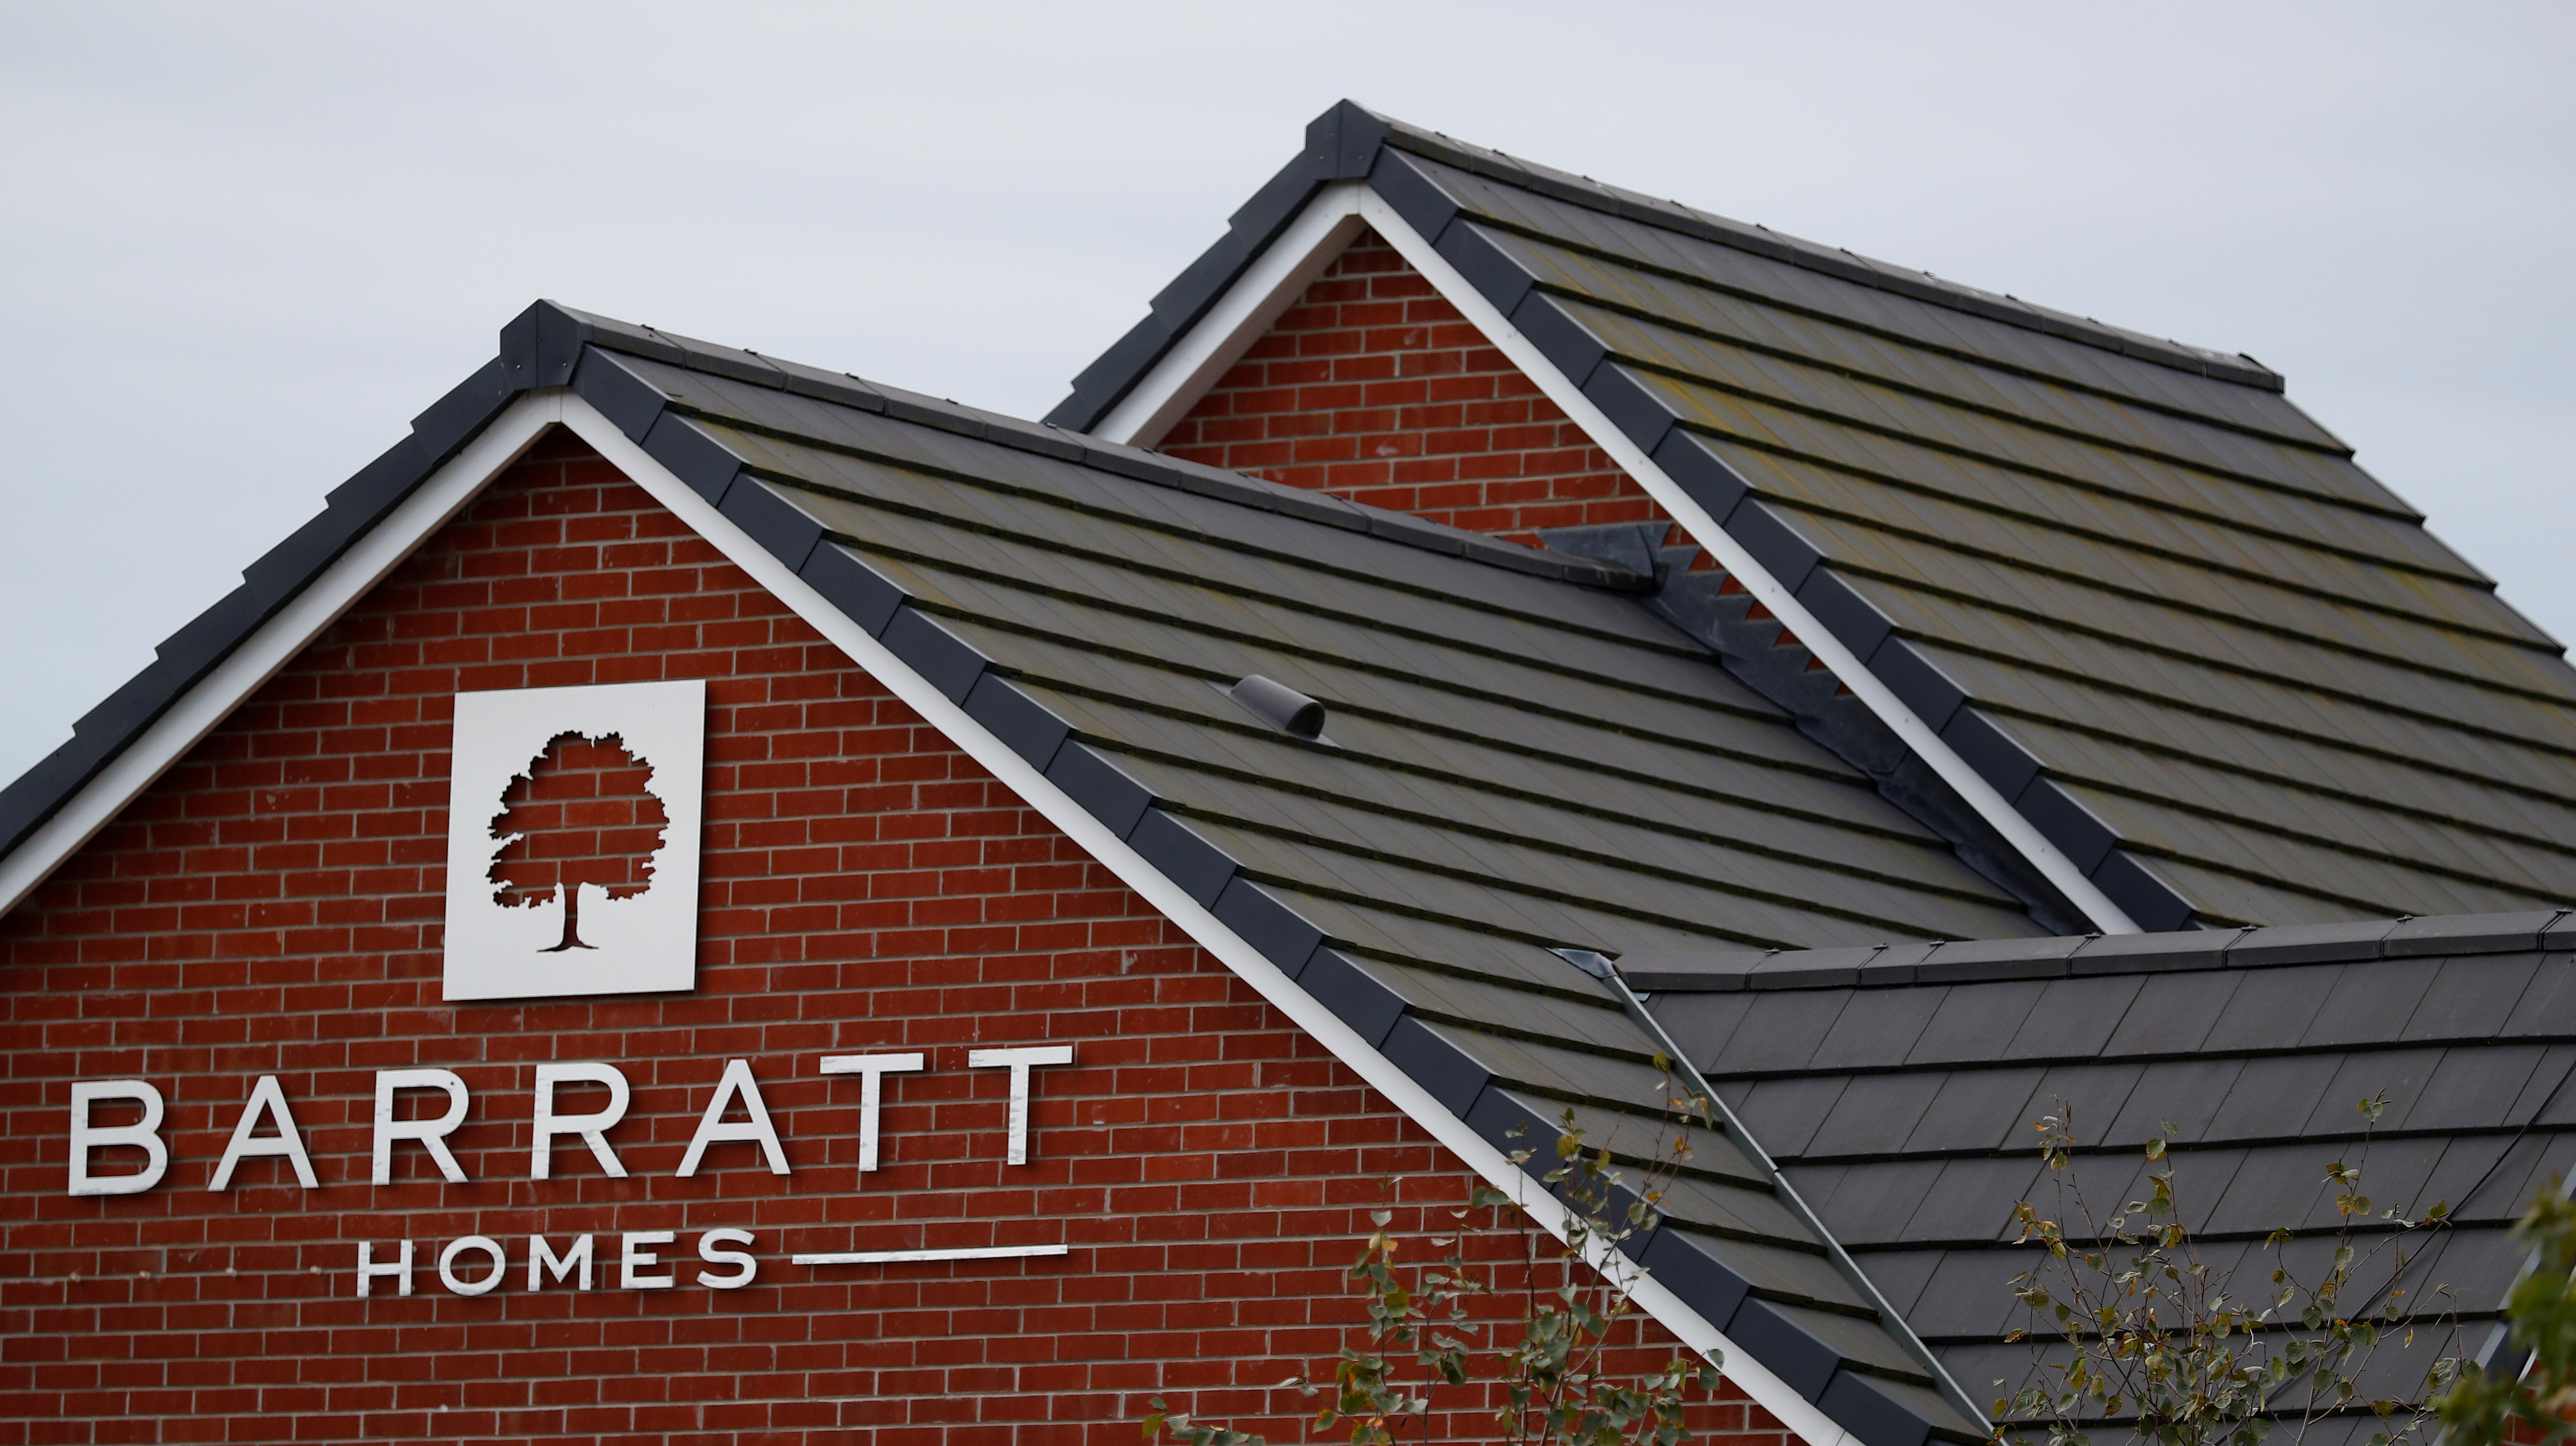 A company logo is seen on the side of a house at a Barratt Homes housing development near Preston, Britain, October 9, 2017. REUTERS/Phil Noble/File Photo